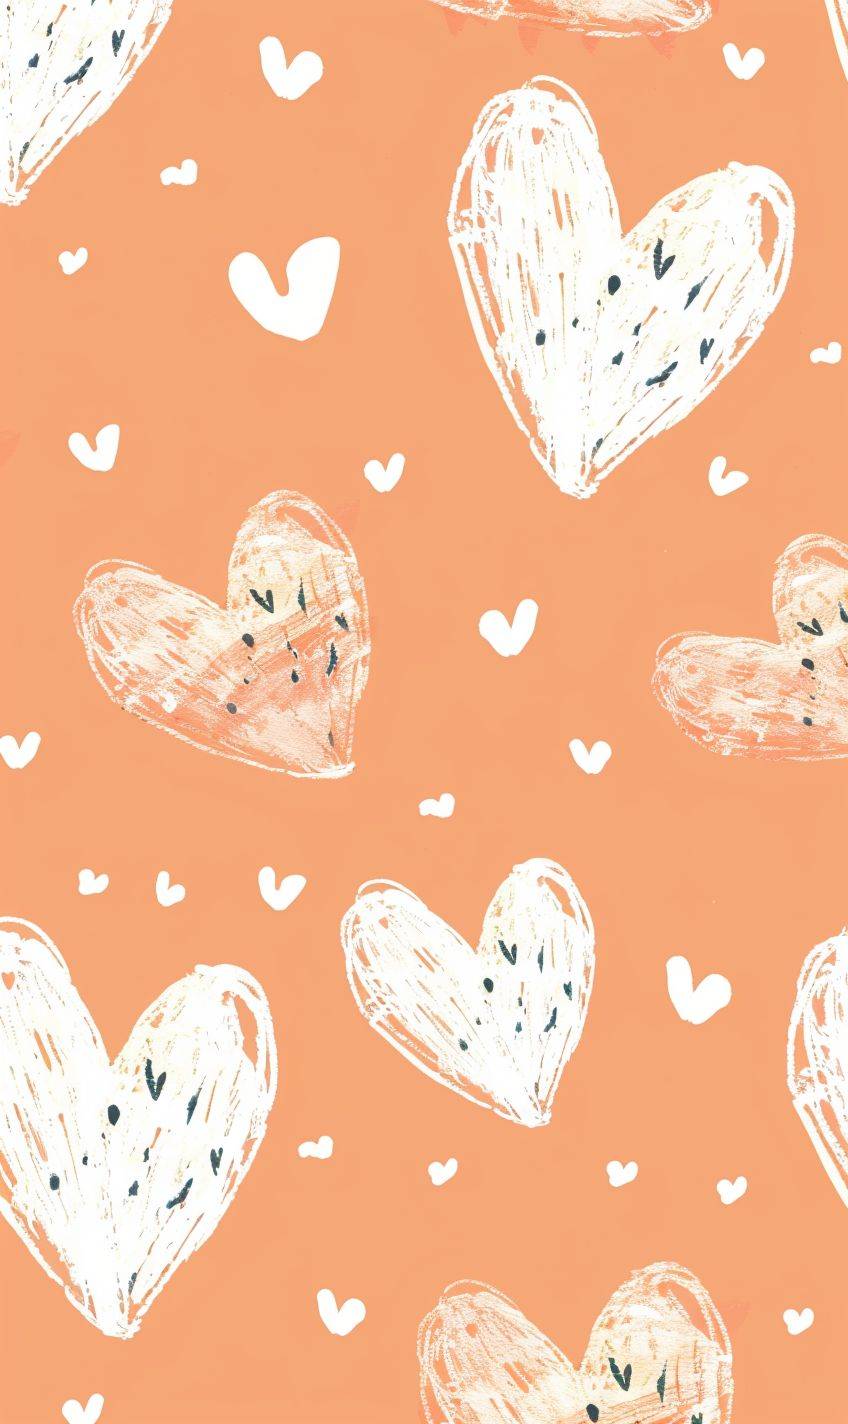 White hand drawn hearts on a peach background seamless pattern, with simple shapes in a minimalistic design. Cute pastel colors in the digital art style.